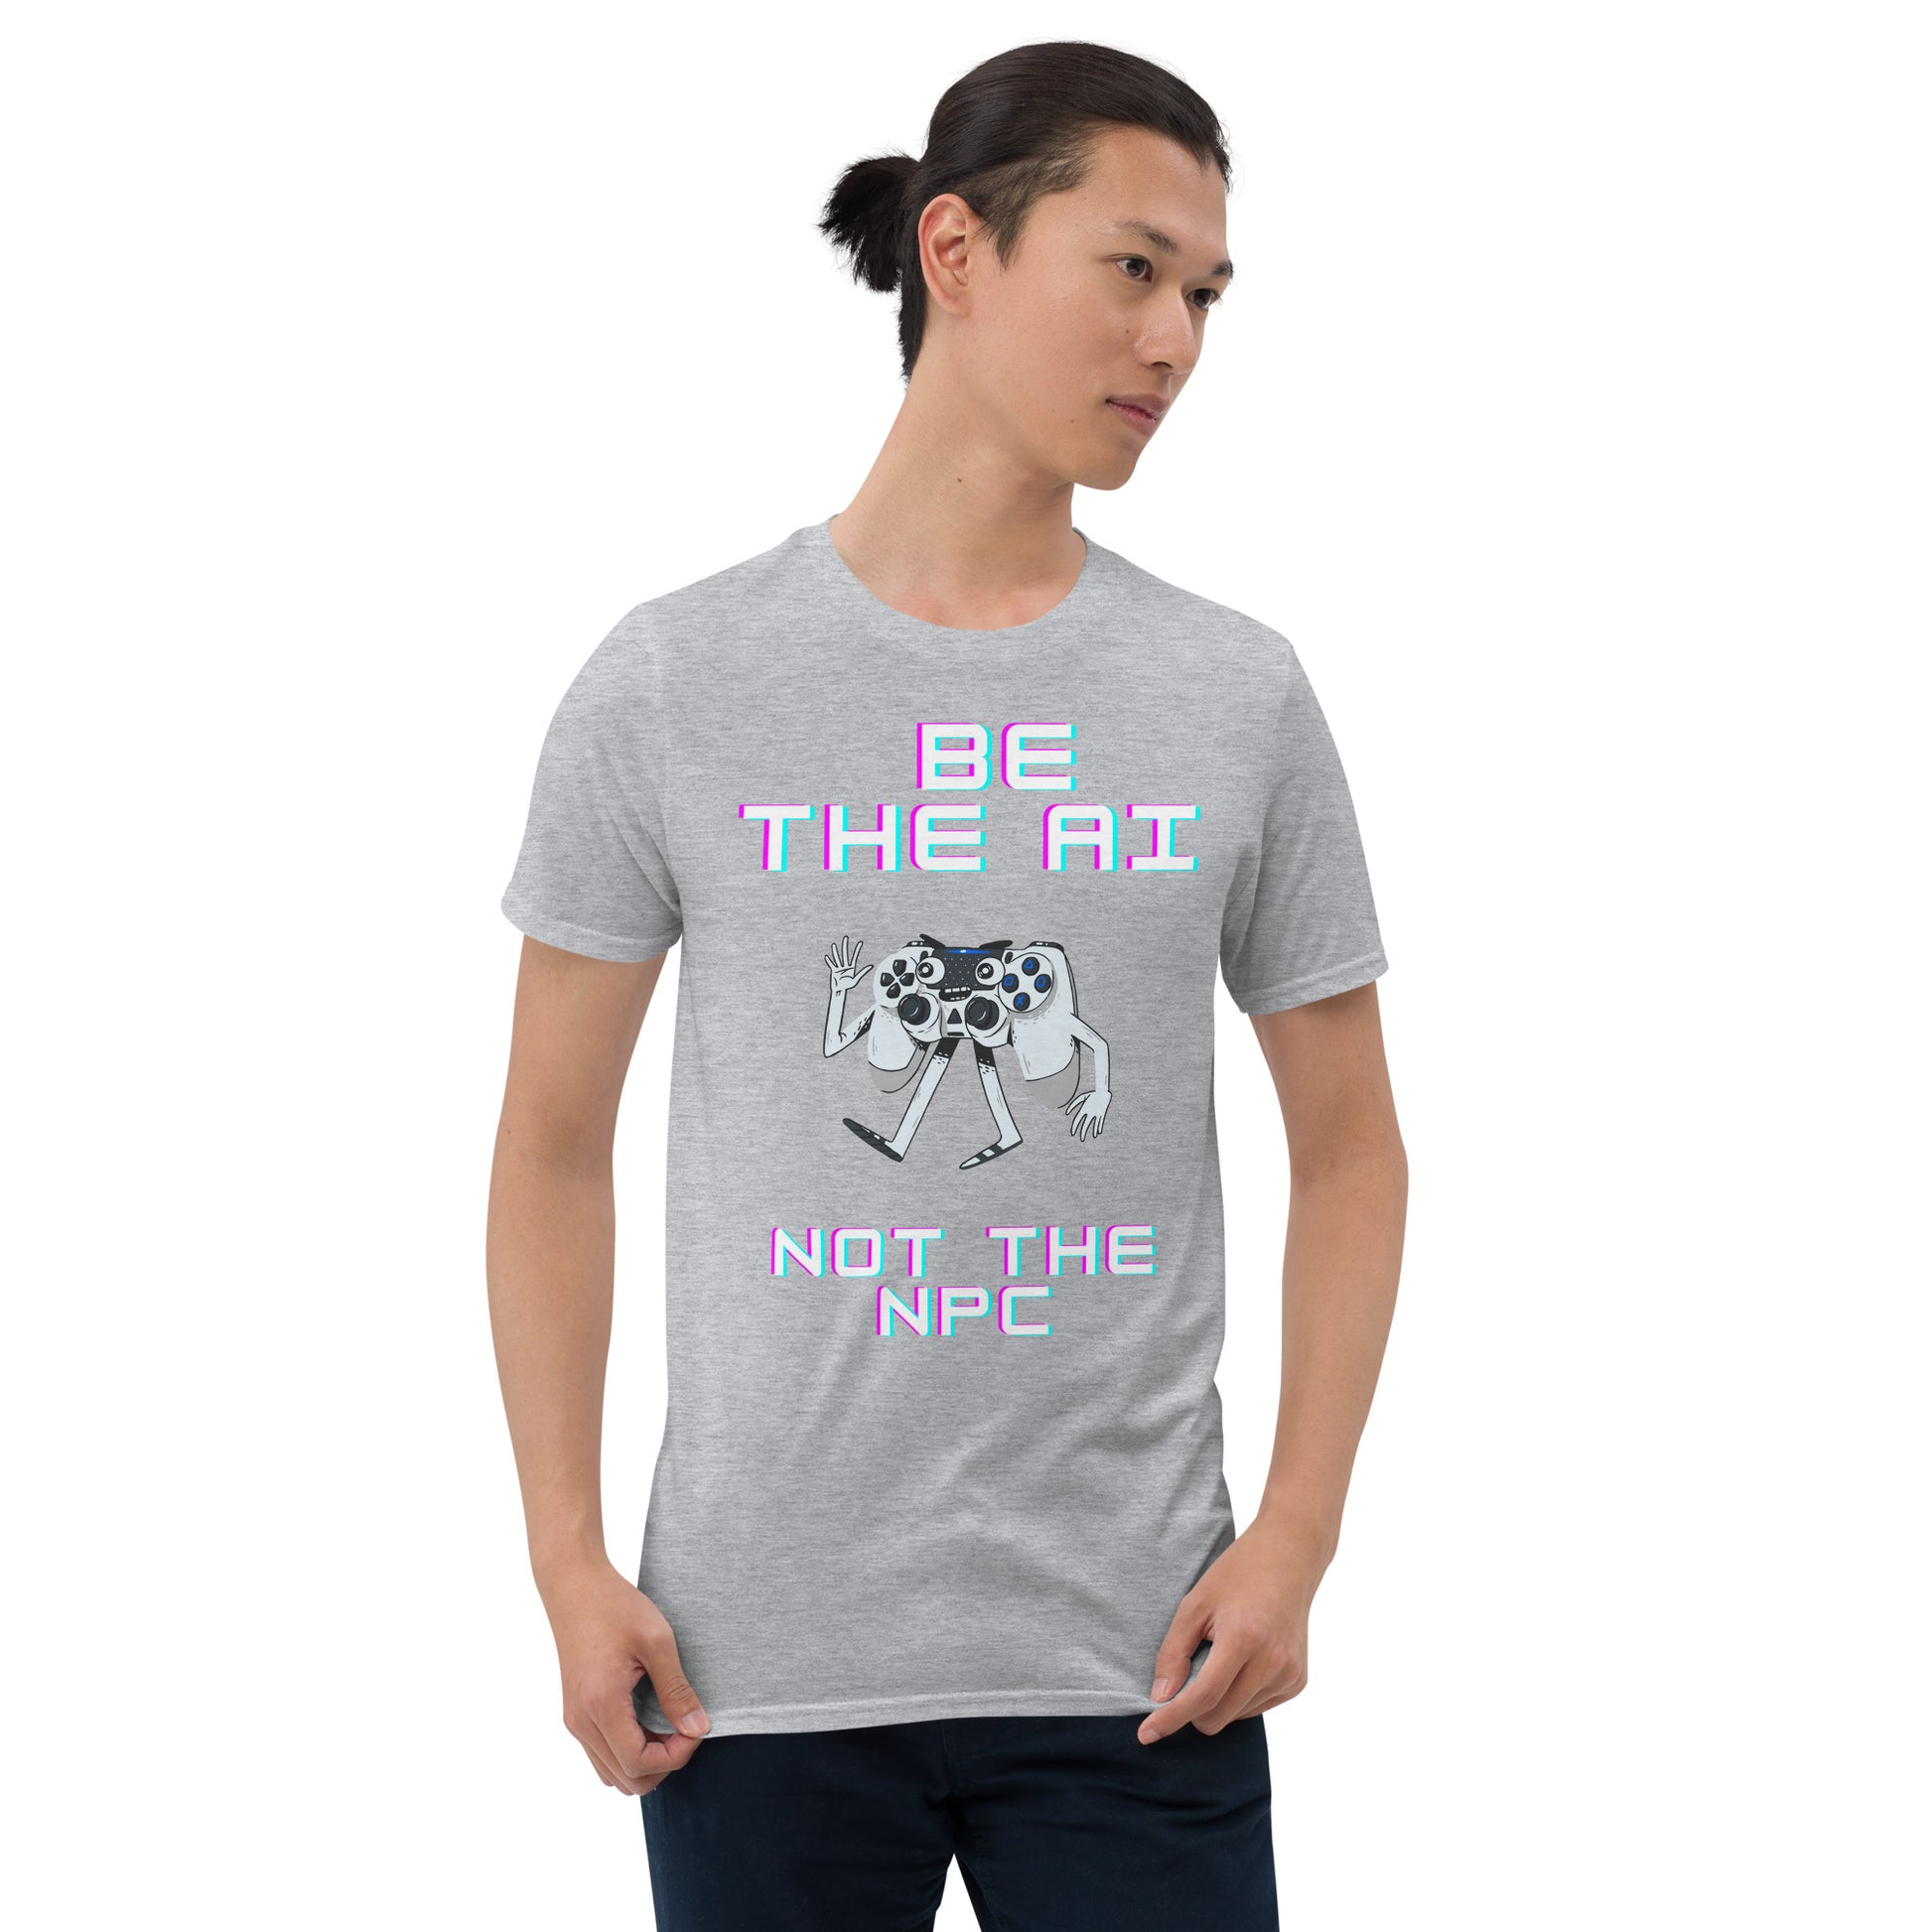 Man in sport grey short-sleeve t-shirt that says be the AI not the NPC